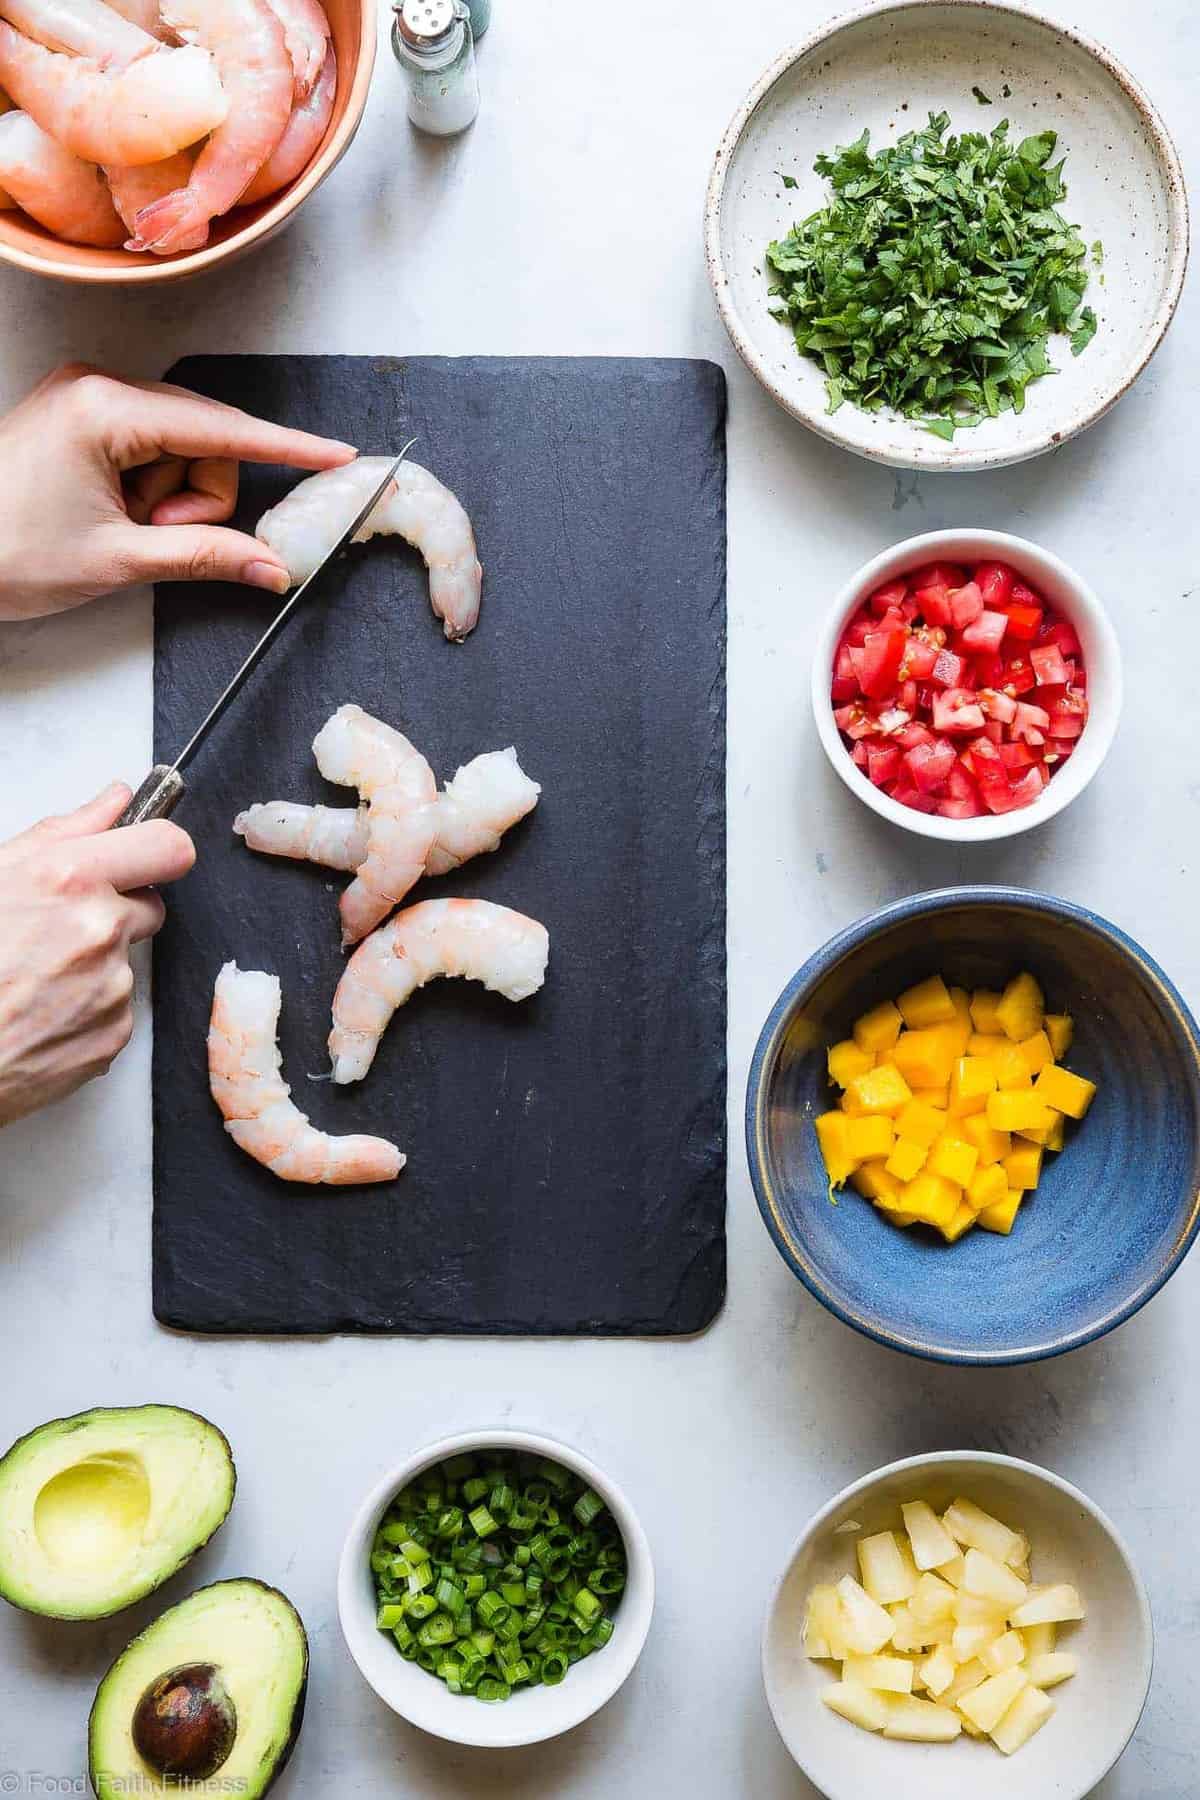 Pineapple Mango Shrimp Ceviche Recipe - A quick, easy and super healthy Ceviche Recipe that is under 150 calories, only 1 Freestyle point, paleo and whole30 friendly, gluten free and tastes like a tropical vacation! You gotta try this! | #Foodfaithfitness | #Glutenfree #Paleo #WeightWatchers #Whole30 #Healthy